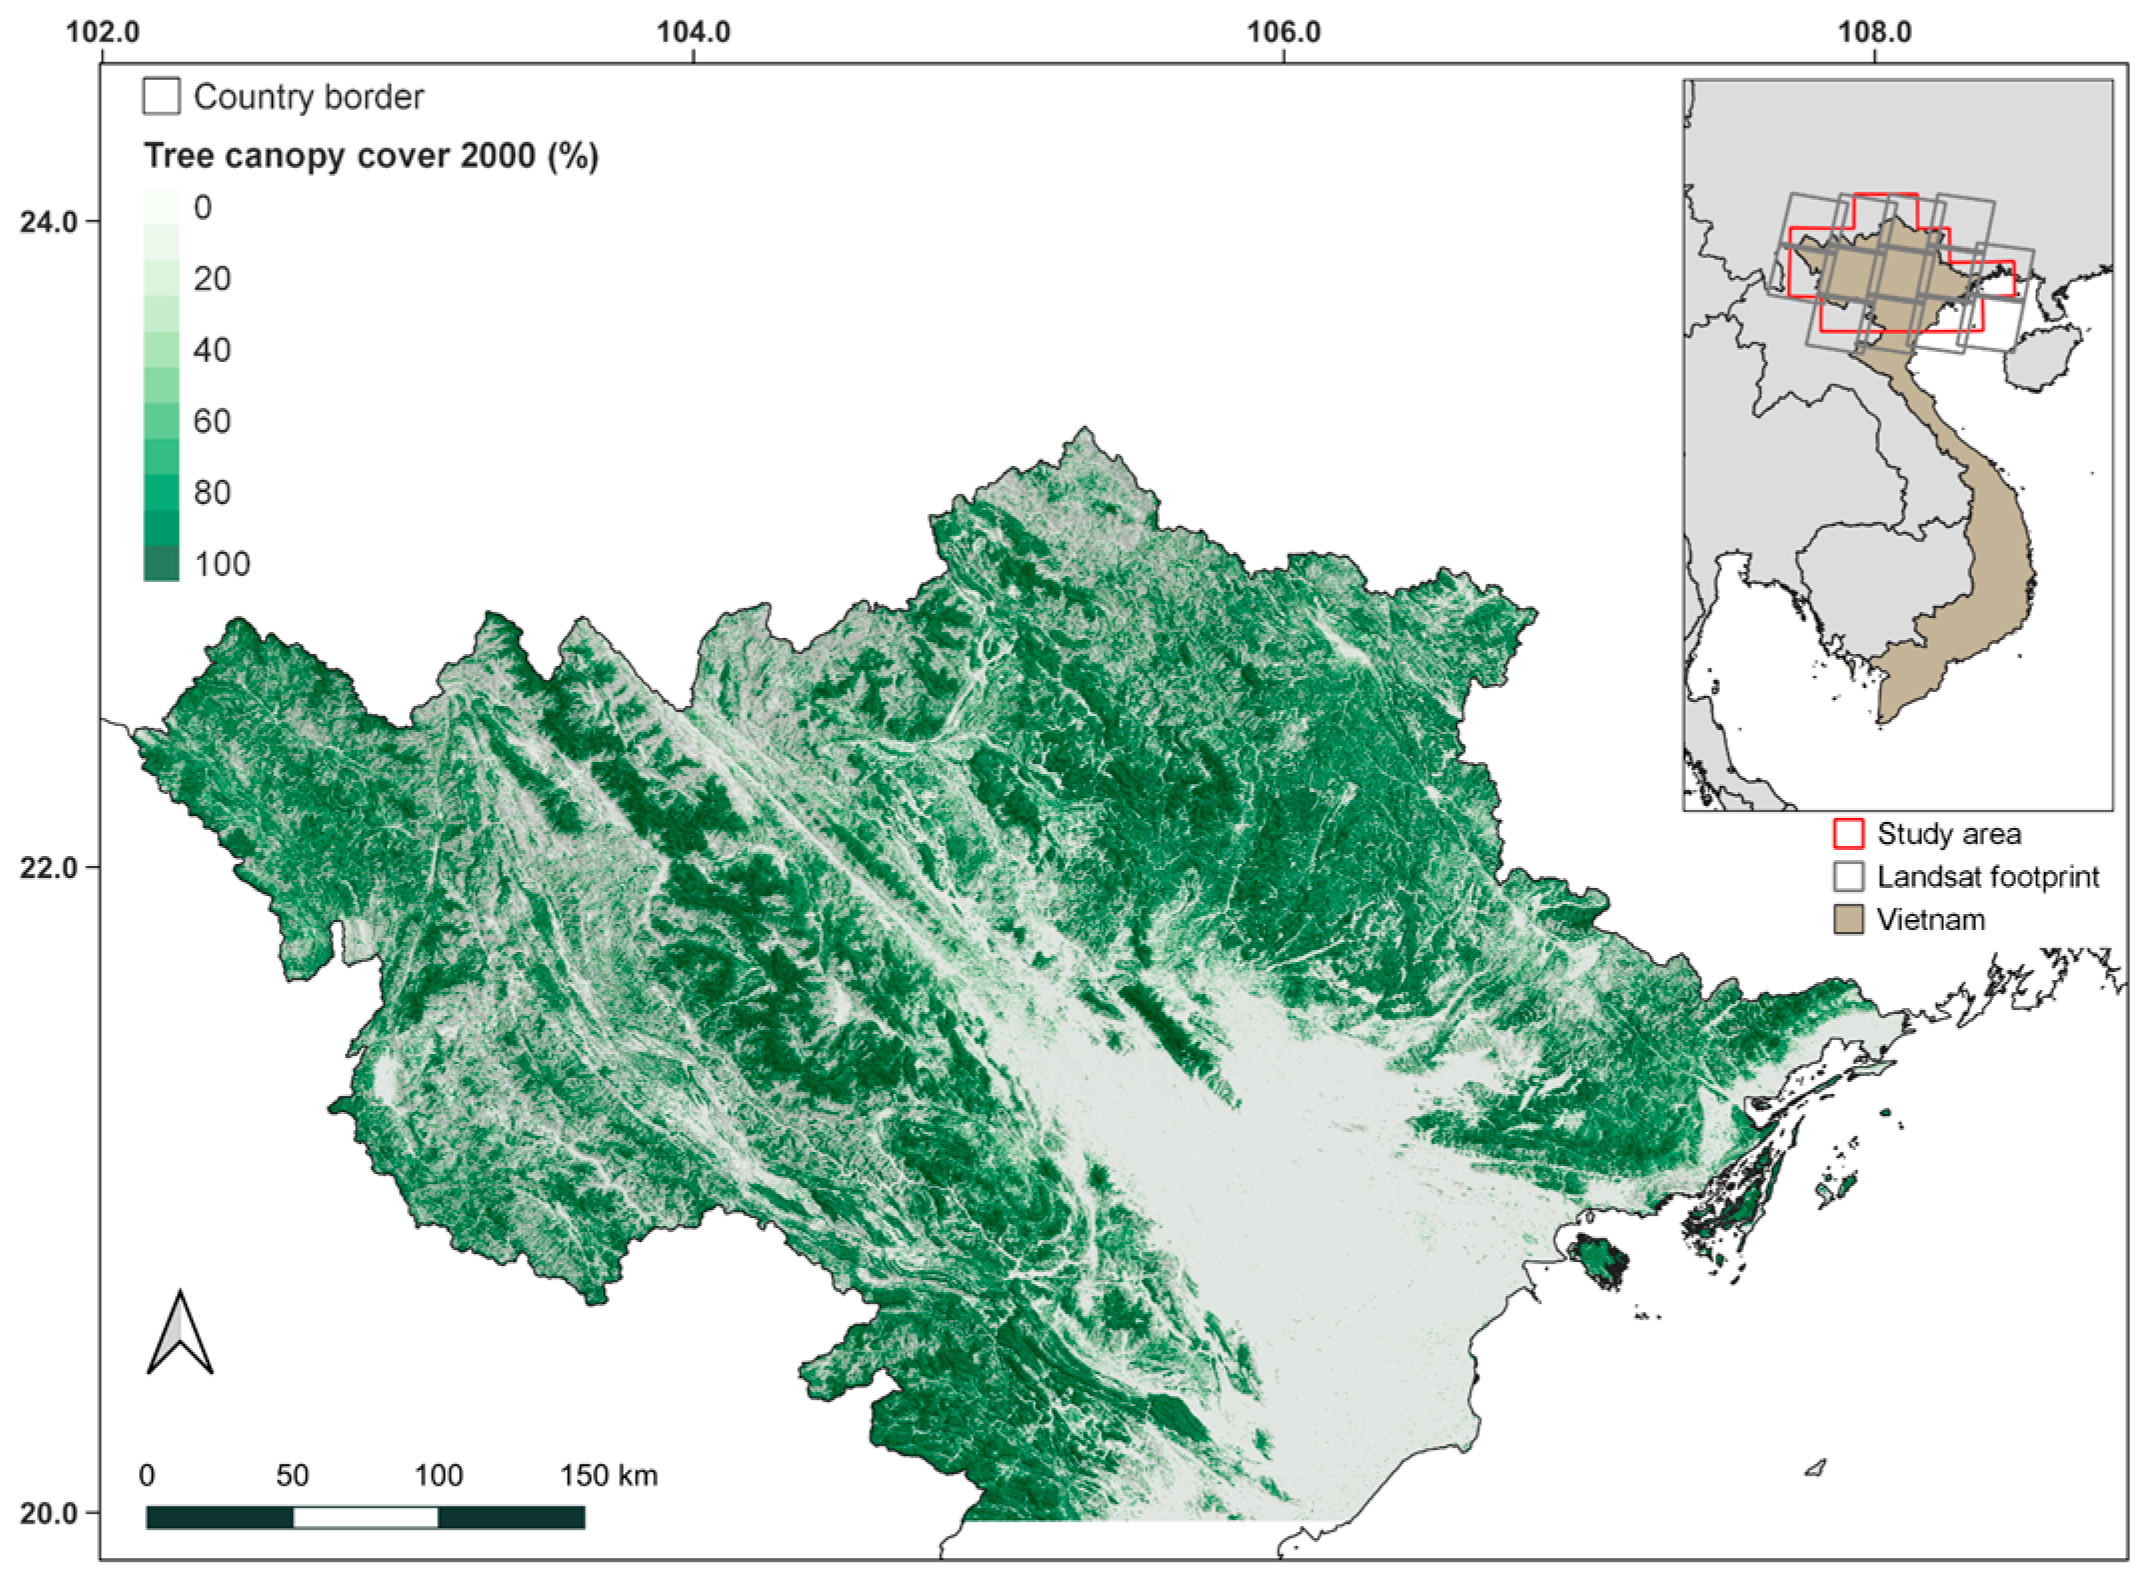 Understanding the dynamics of snow cover in forests can help us predict  flood risks